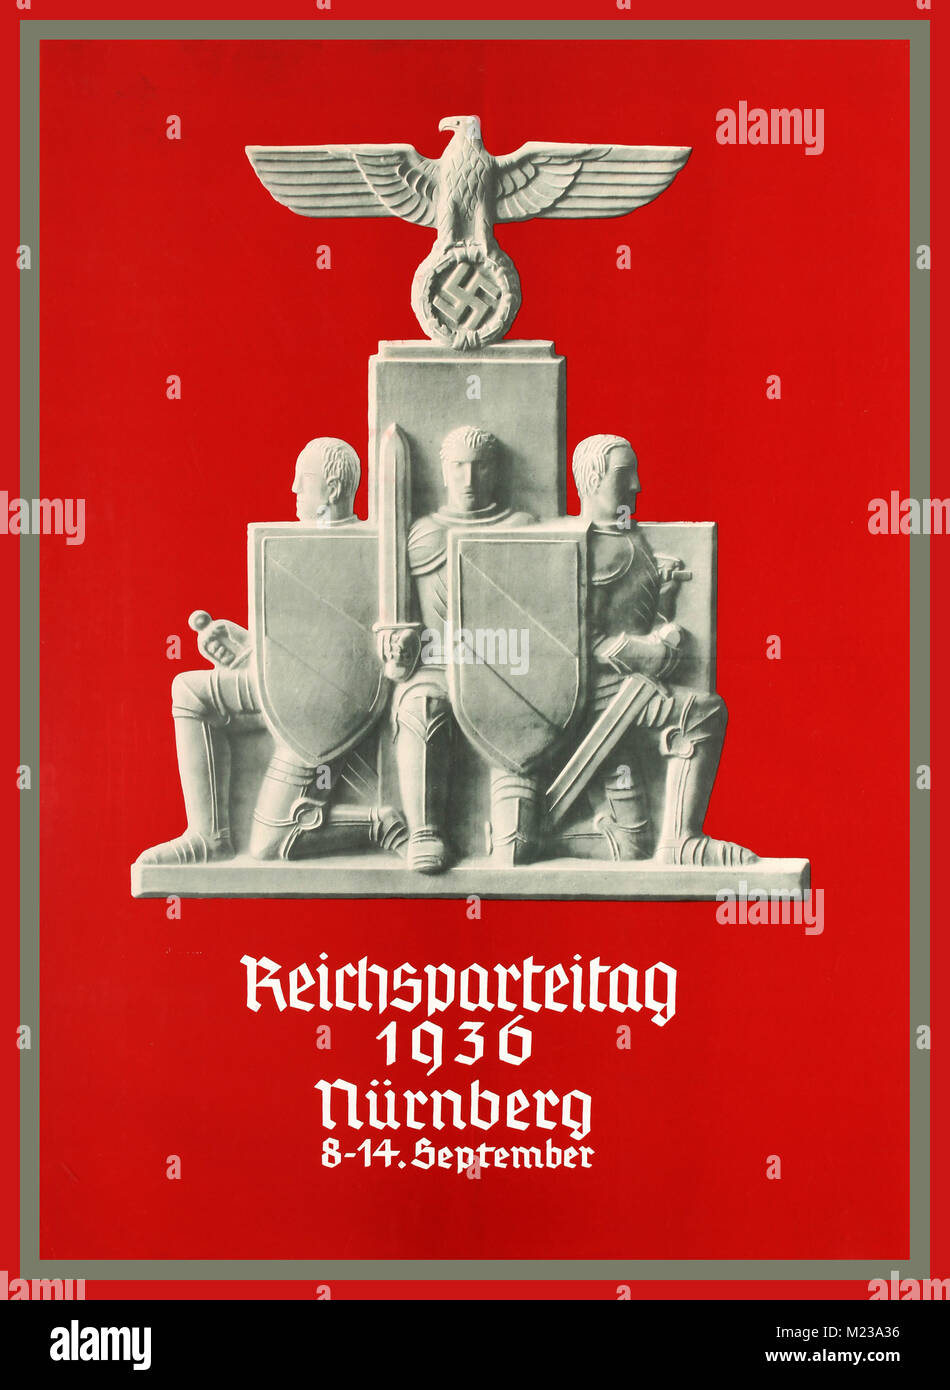 NUREMBERG RALLIES Propaganda Poster Third Reich NSDAP Nazi Party Week 1936 Original vintage Nazi poster promoting the Third Reich conference held in the city of Nuremberg between the 8th and 14th of September 1936. This poster features a Nazi marble sculpture representing three sitting knights with shields and swords at the bottom and the eagle and swastika symbols displayed at the top of the statue Stock Photo